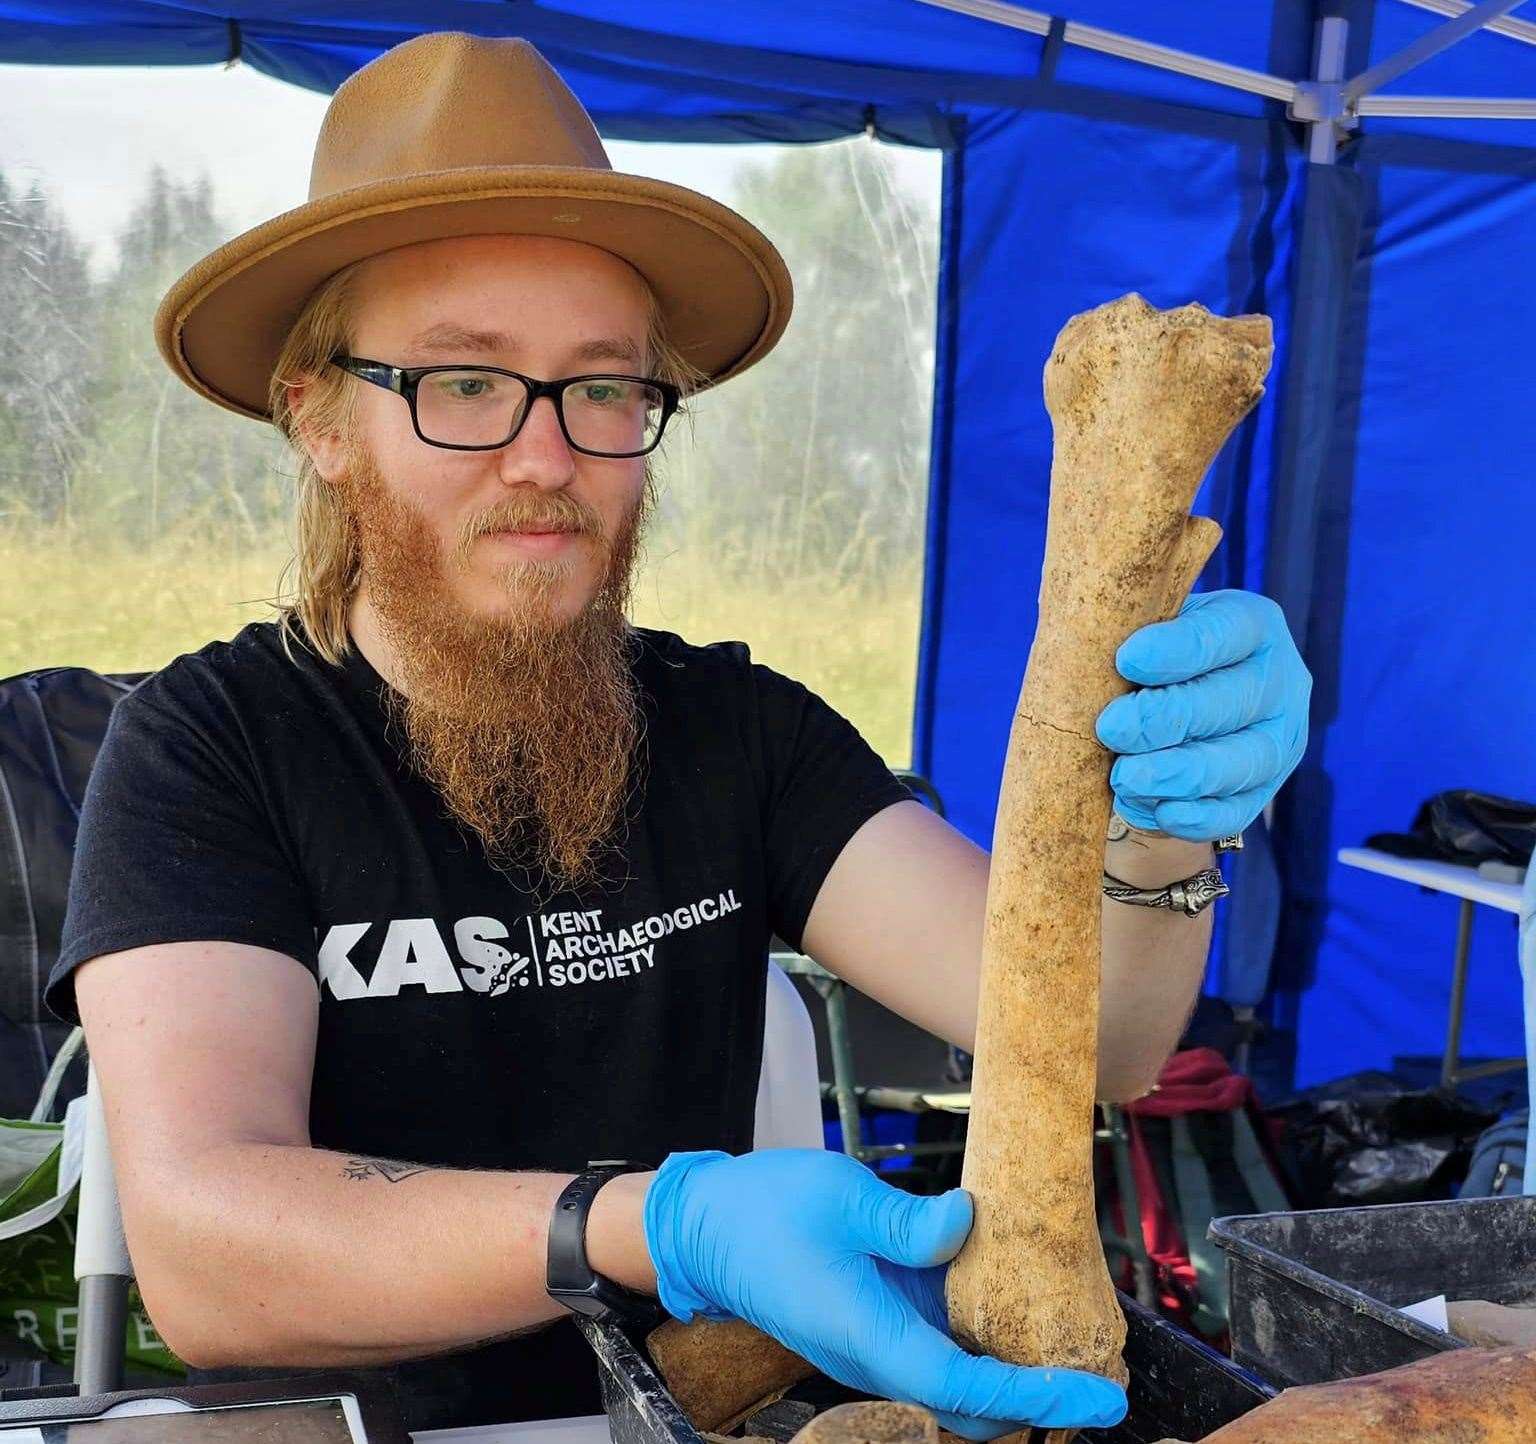 Archaeologists have been puzzled by “unusual” horse bones